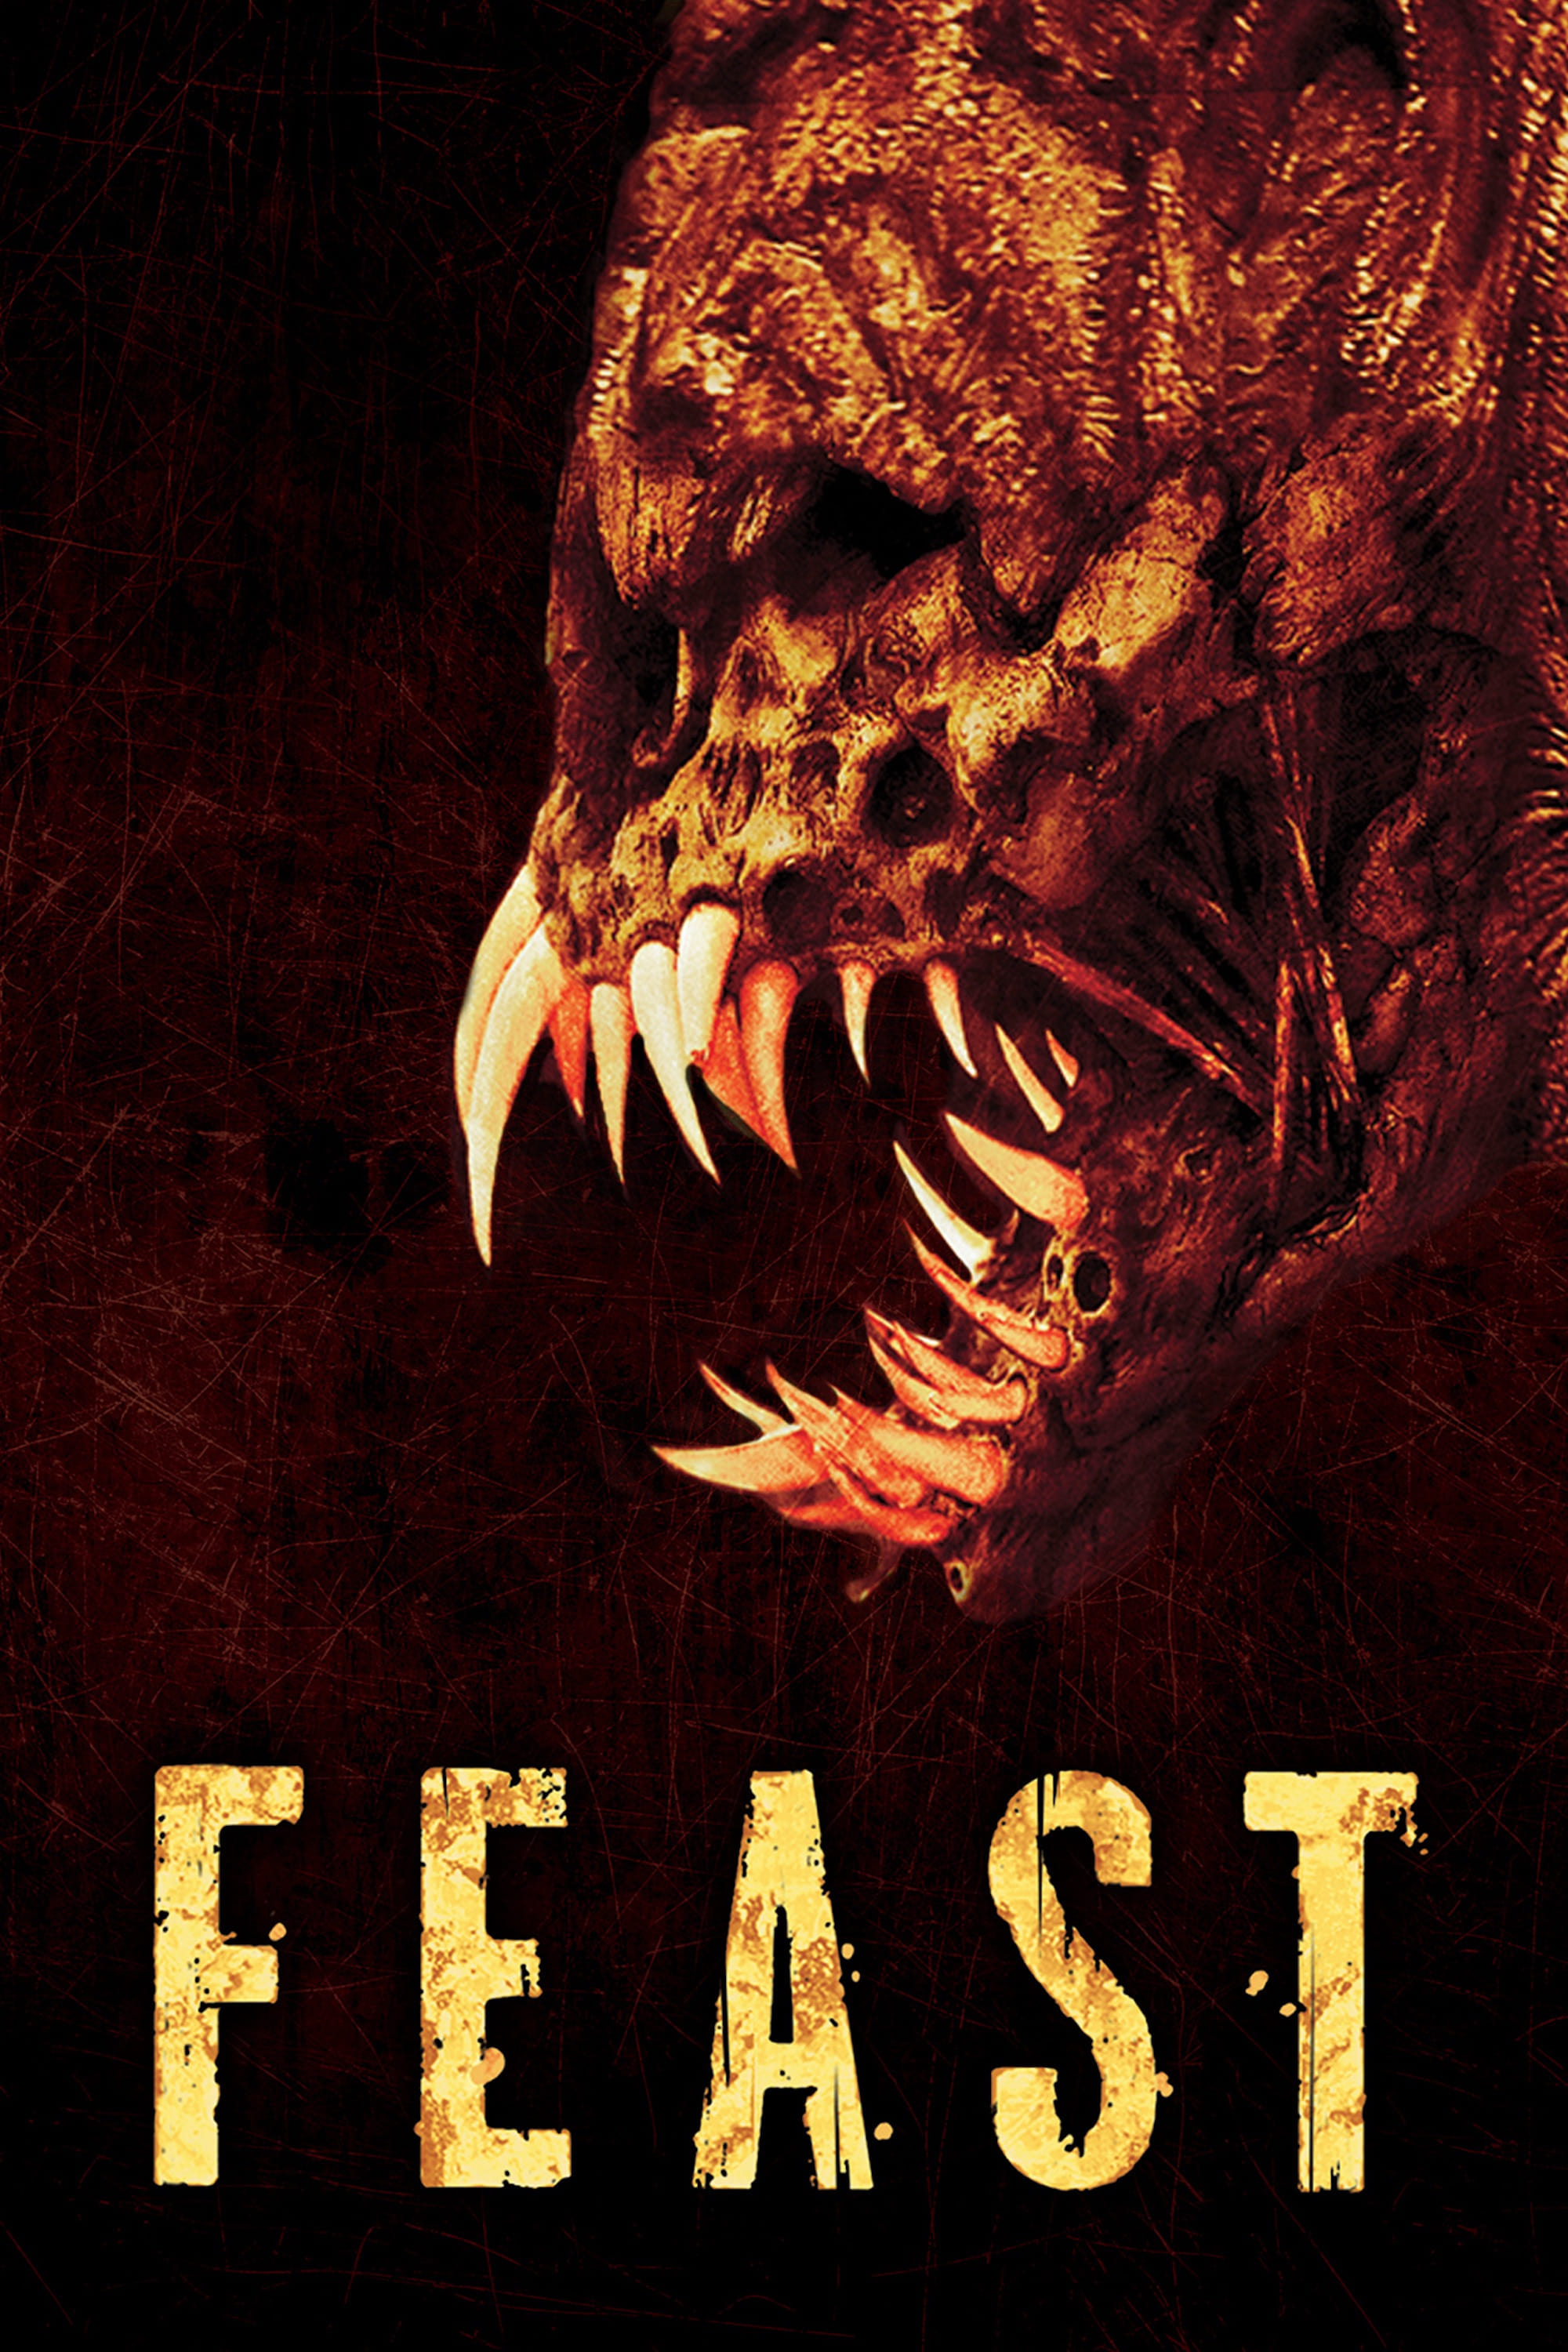 Feast.2005.540p.Open.Matte.Unrated.BluRay.x264.HUN-BiTBoX